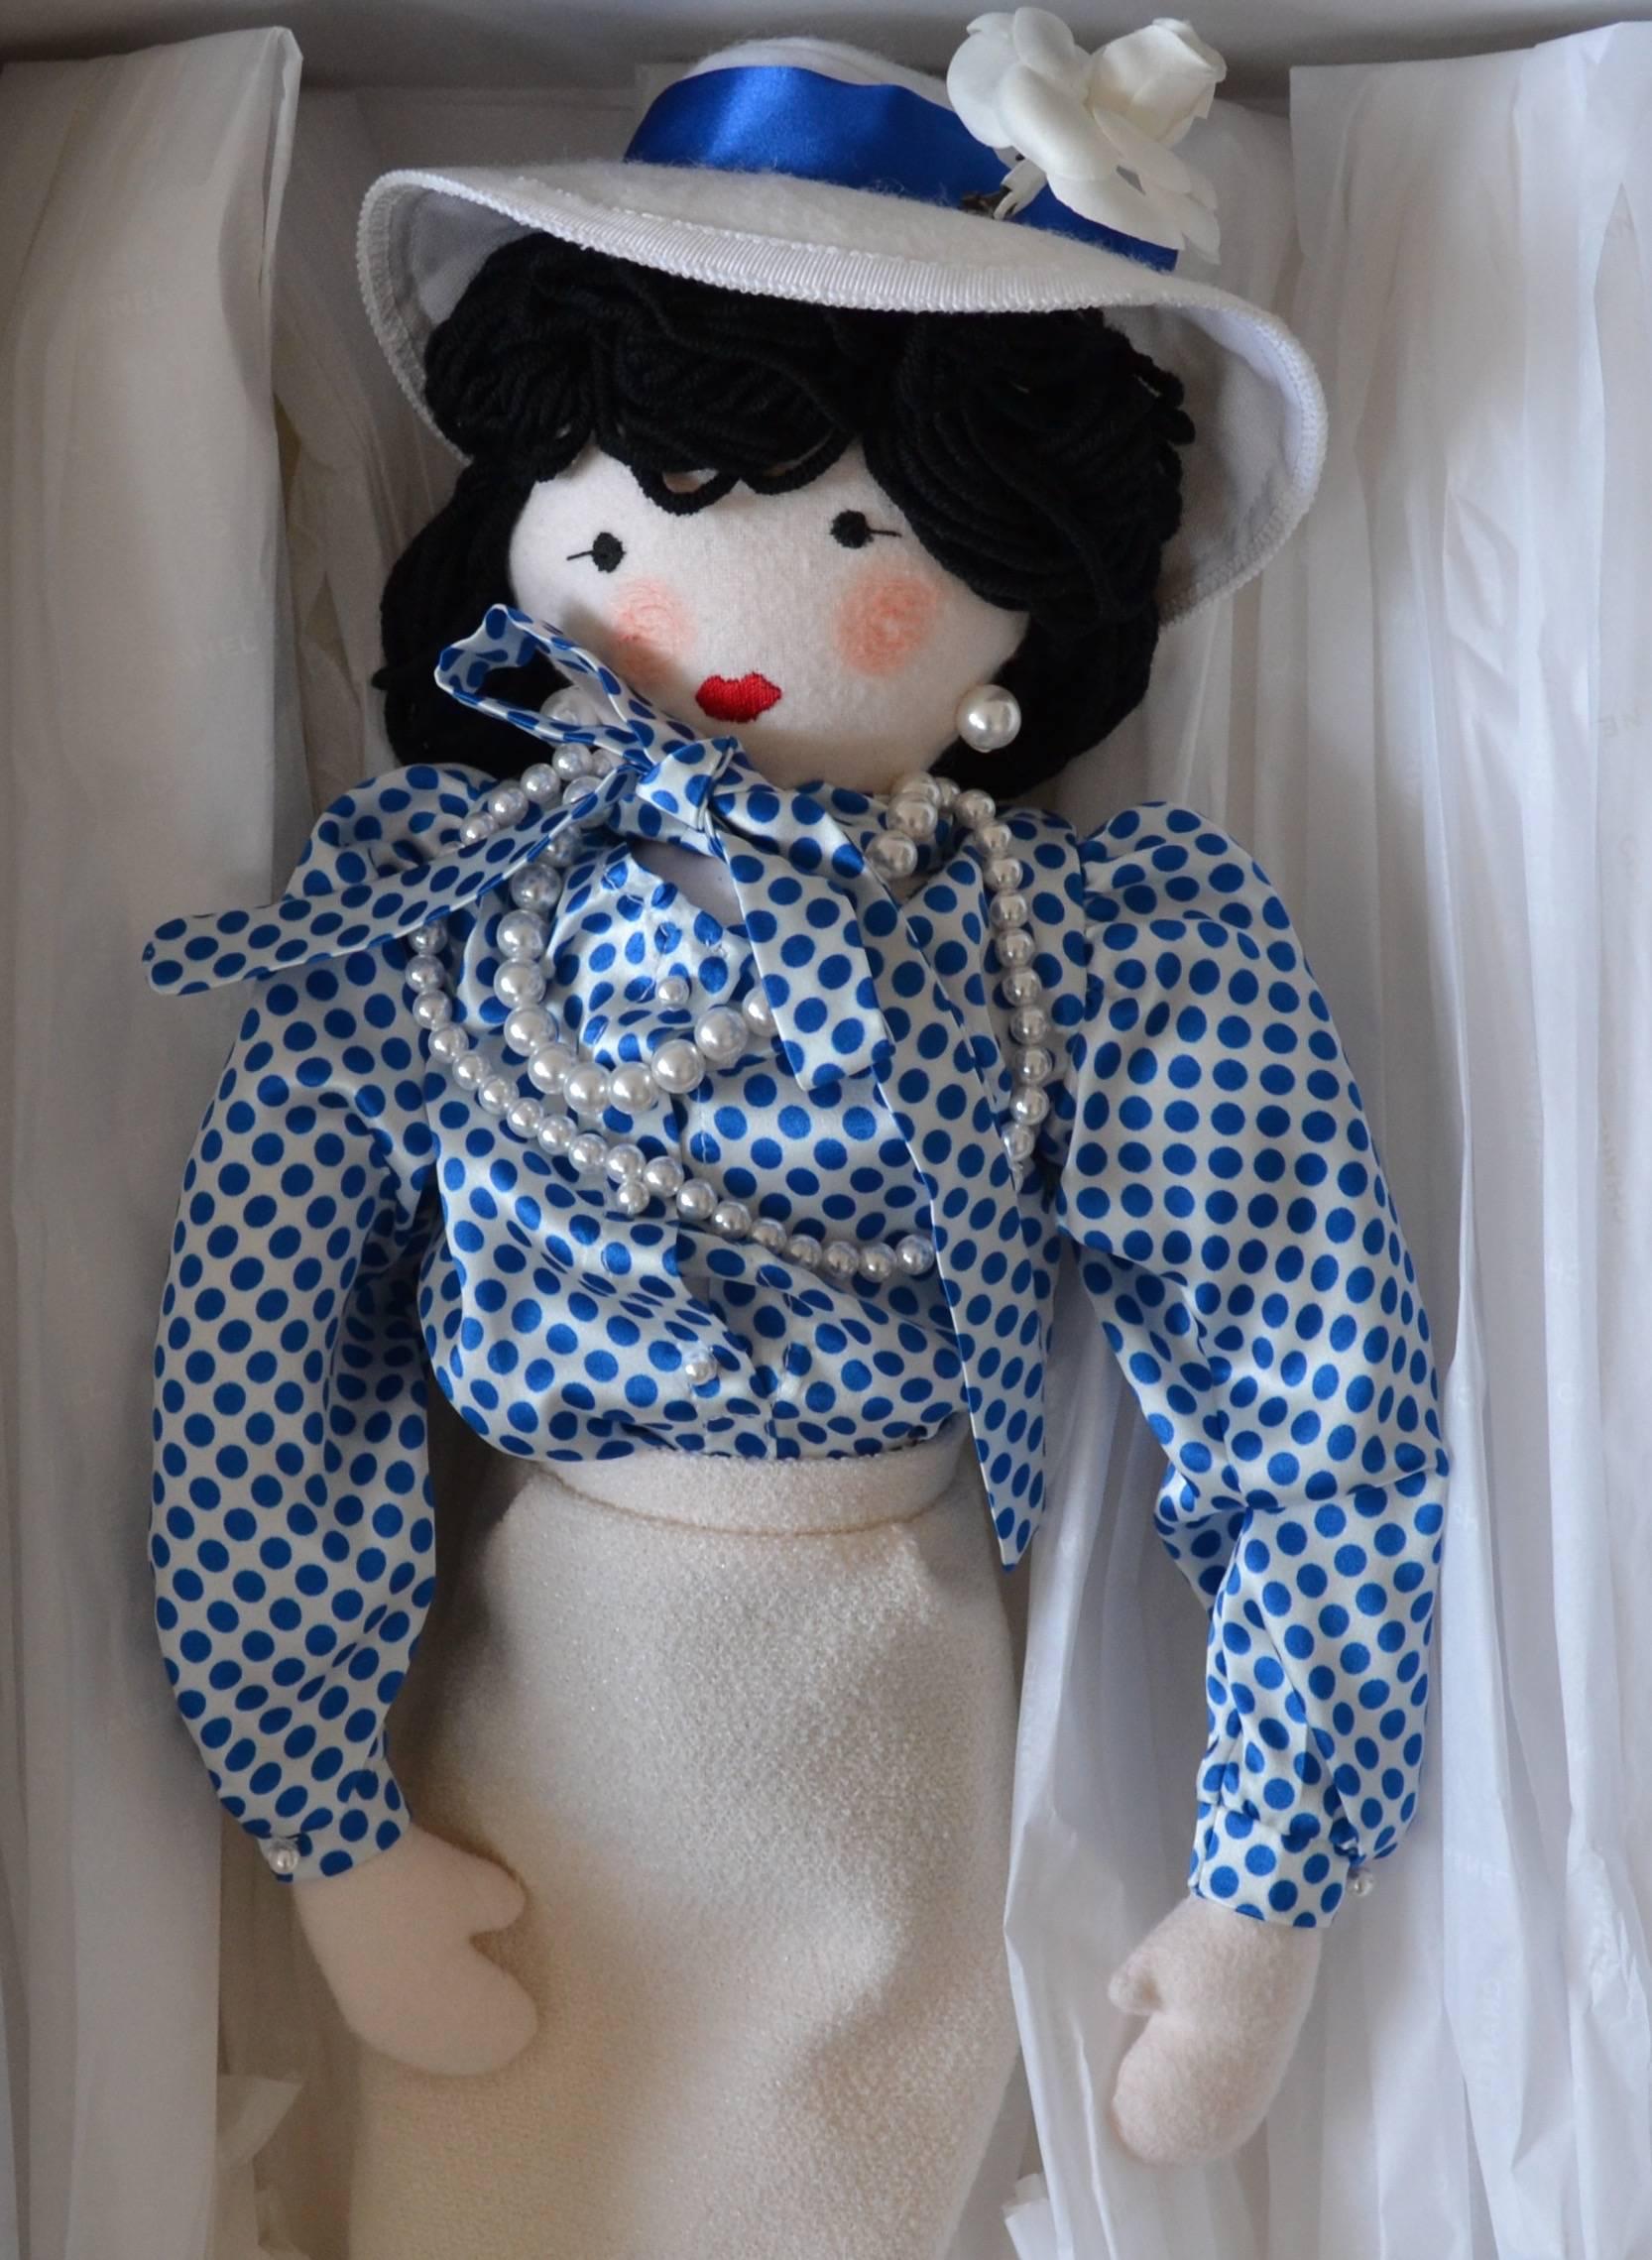 Chanel Doll Coco by Colette
Collector piece - 2011
Chanel brand and Colette luxury Parisian concept store
Chanel designed clothes
Top with famous Colette blue spot - Hat with a Chanel camelia - pearl necklace - silk top - jersey dress
 
Dimensions :